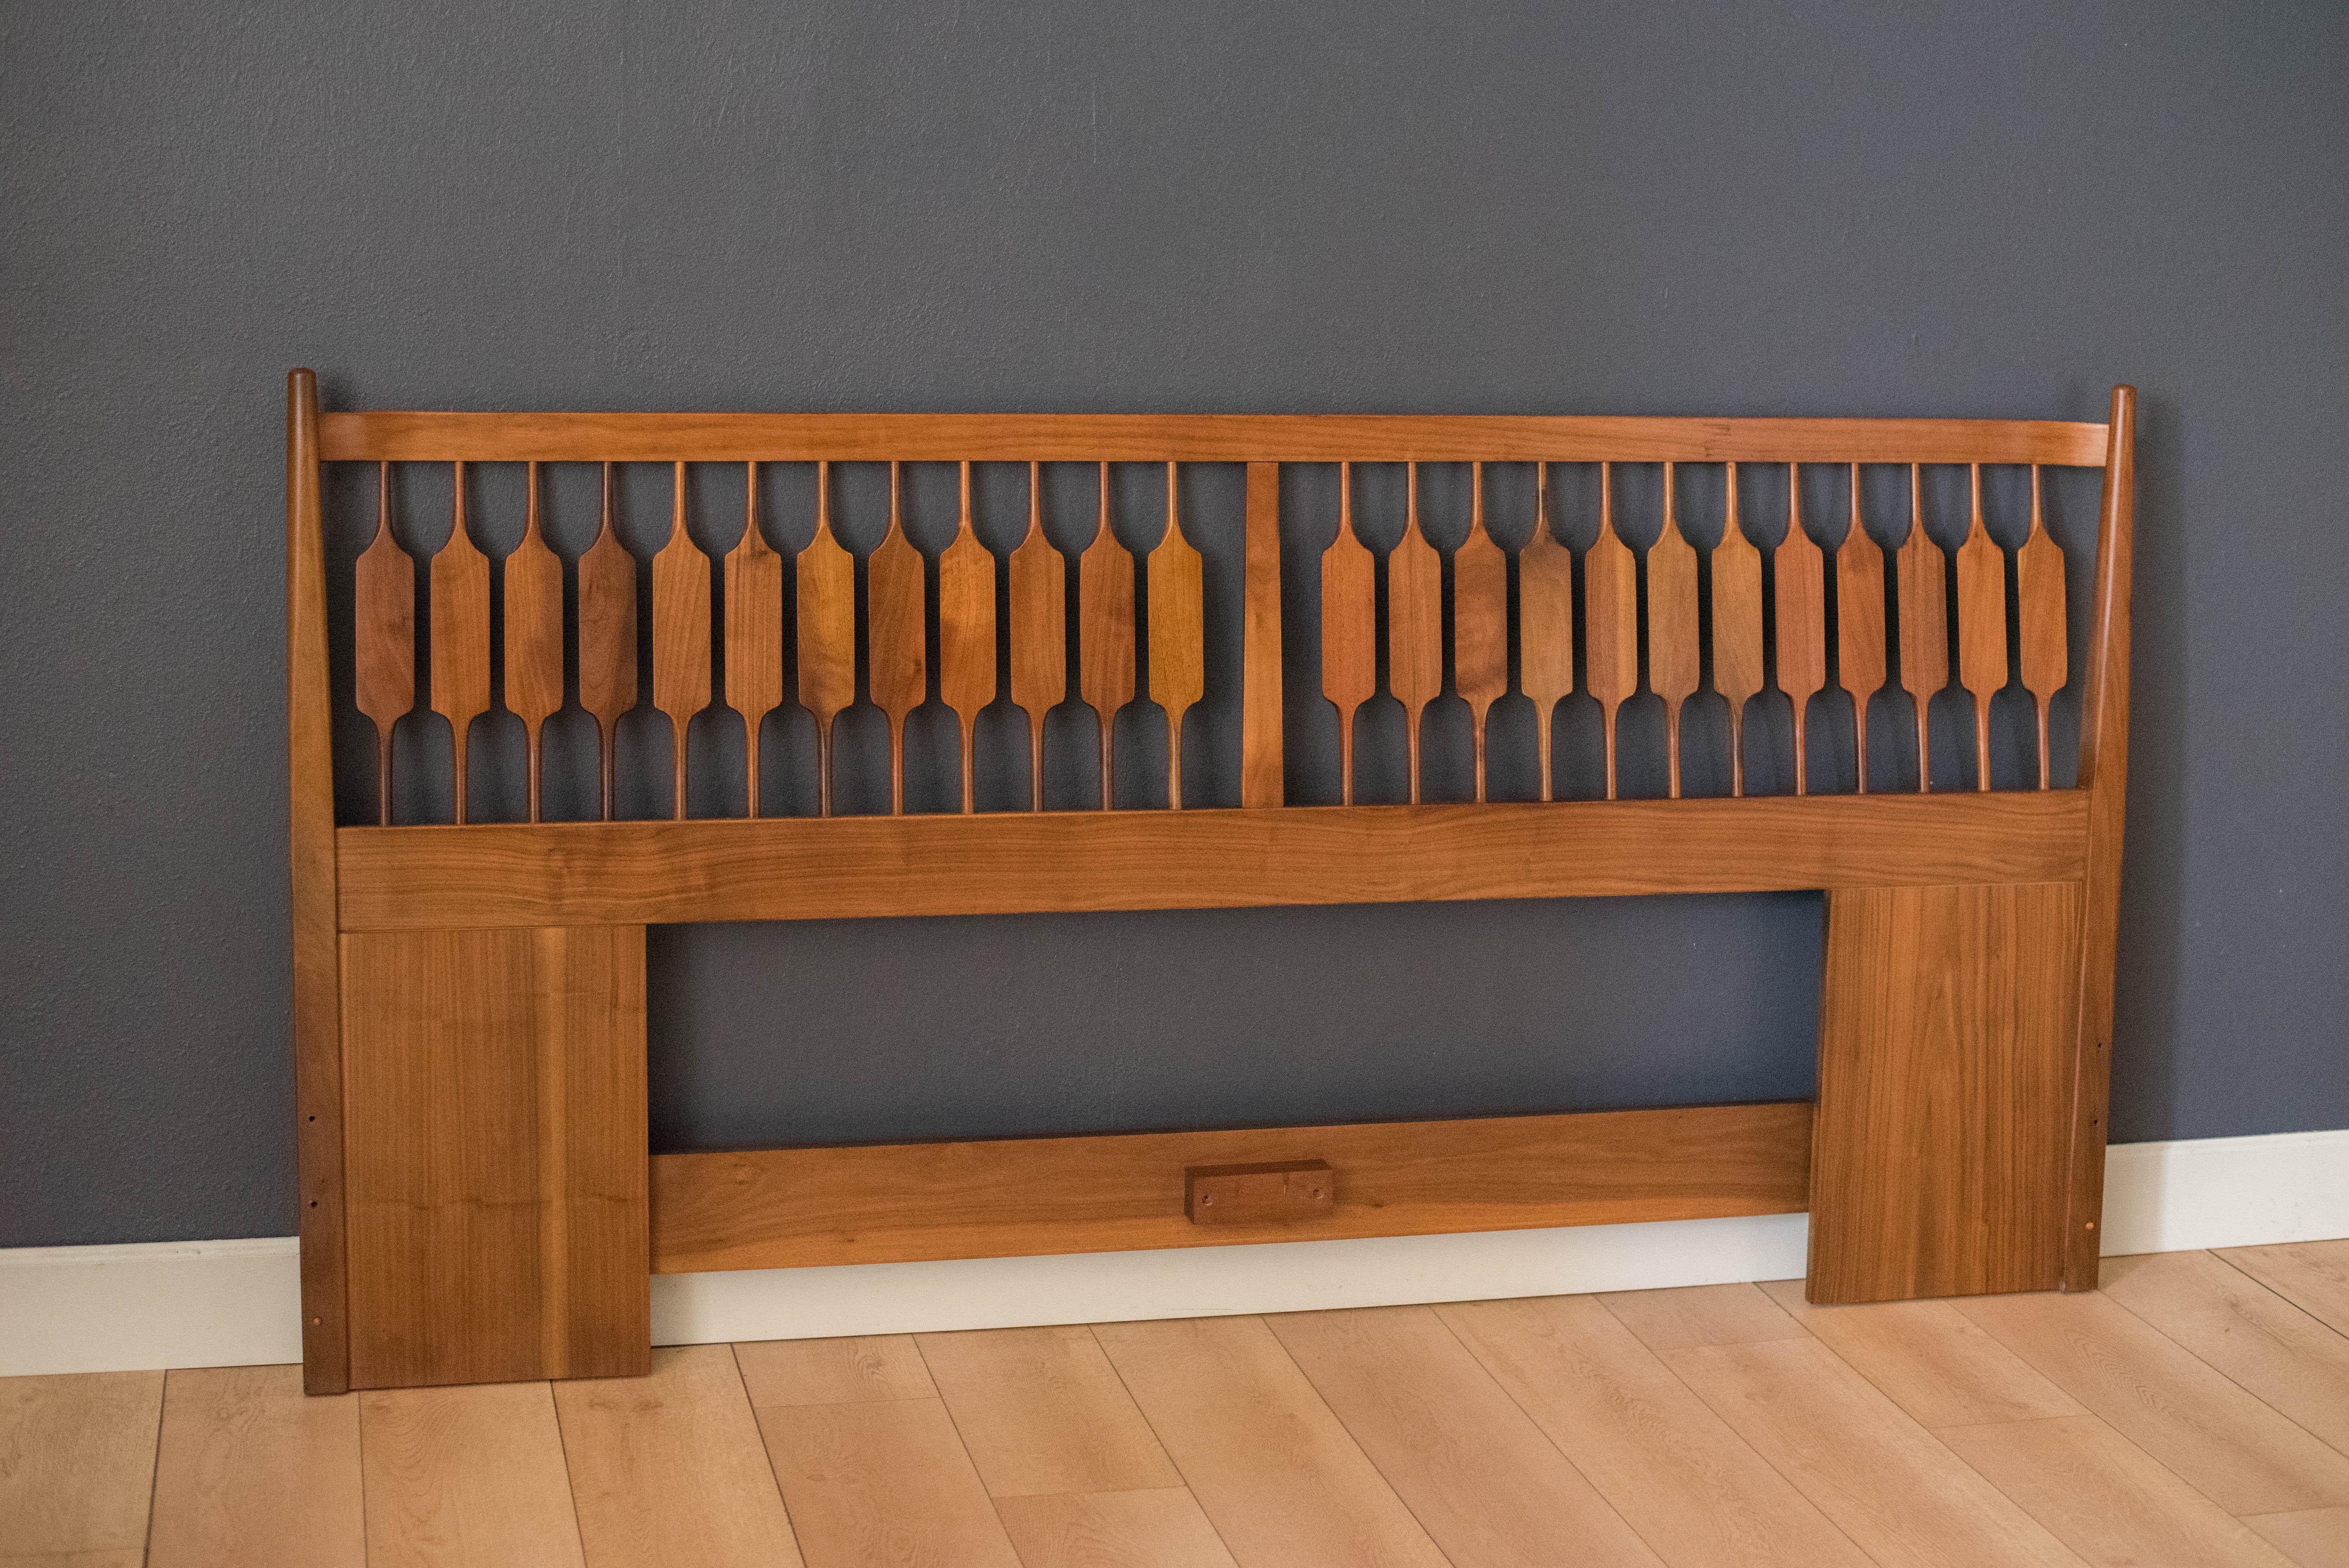 Mid century king headboard designed by Stewart McDougall & Kipp Stewart for Drexel Furniture Co. This piece displays the Declaration line's signature sculpted design in black walnut. Matching pair of nightstands available in separate listing.